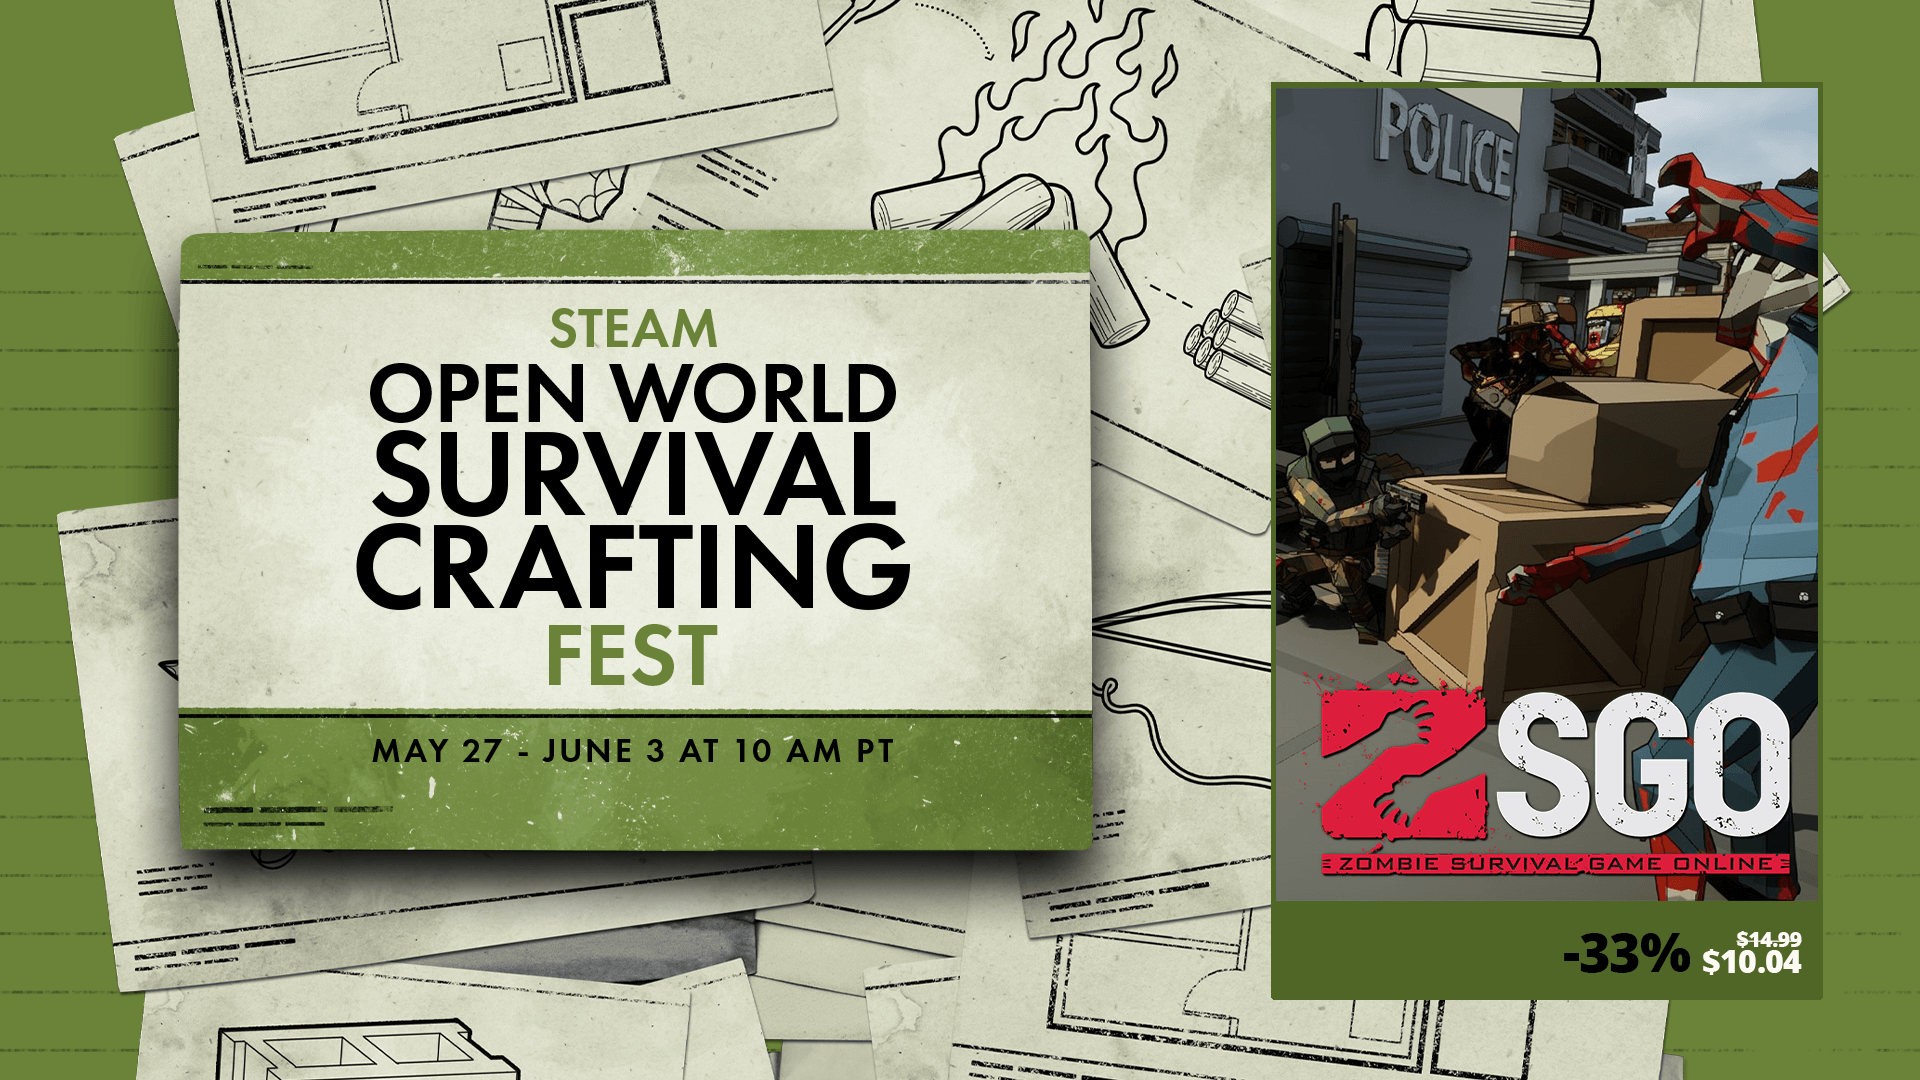 The Steam Open World Survival Crafting Fest banner for ZSGO.